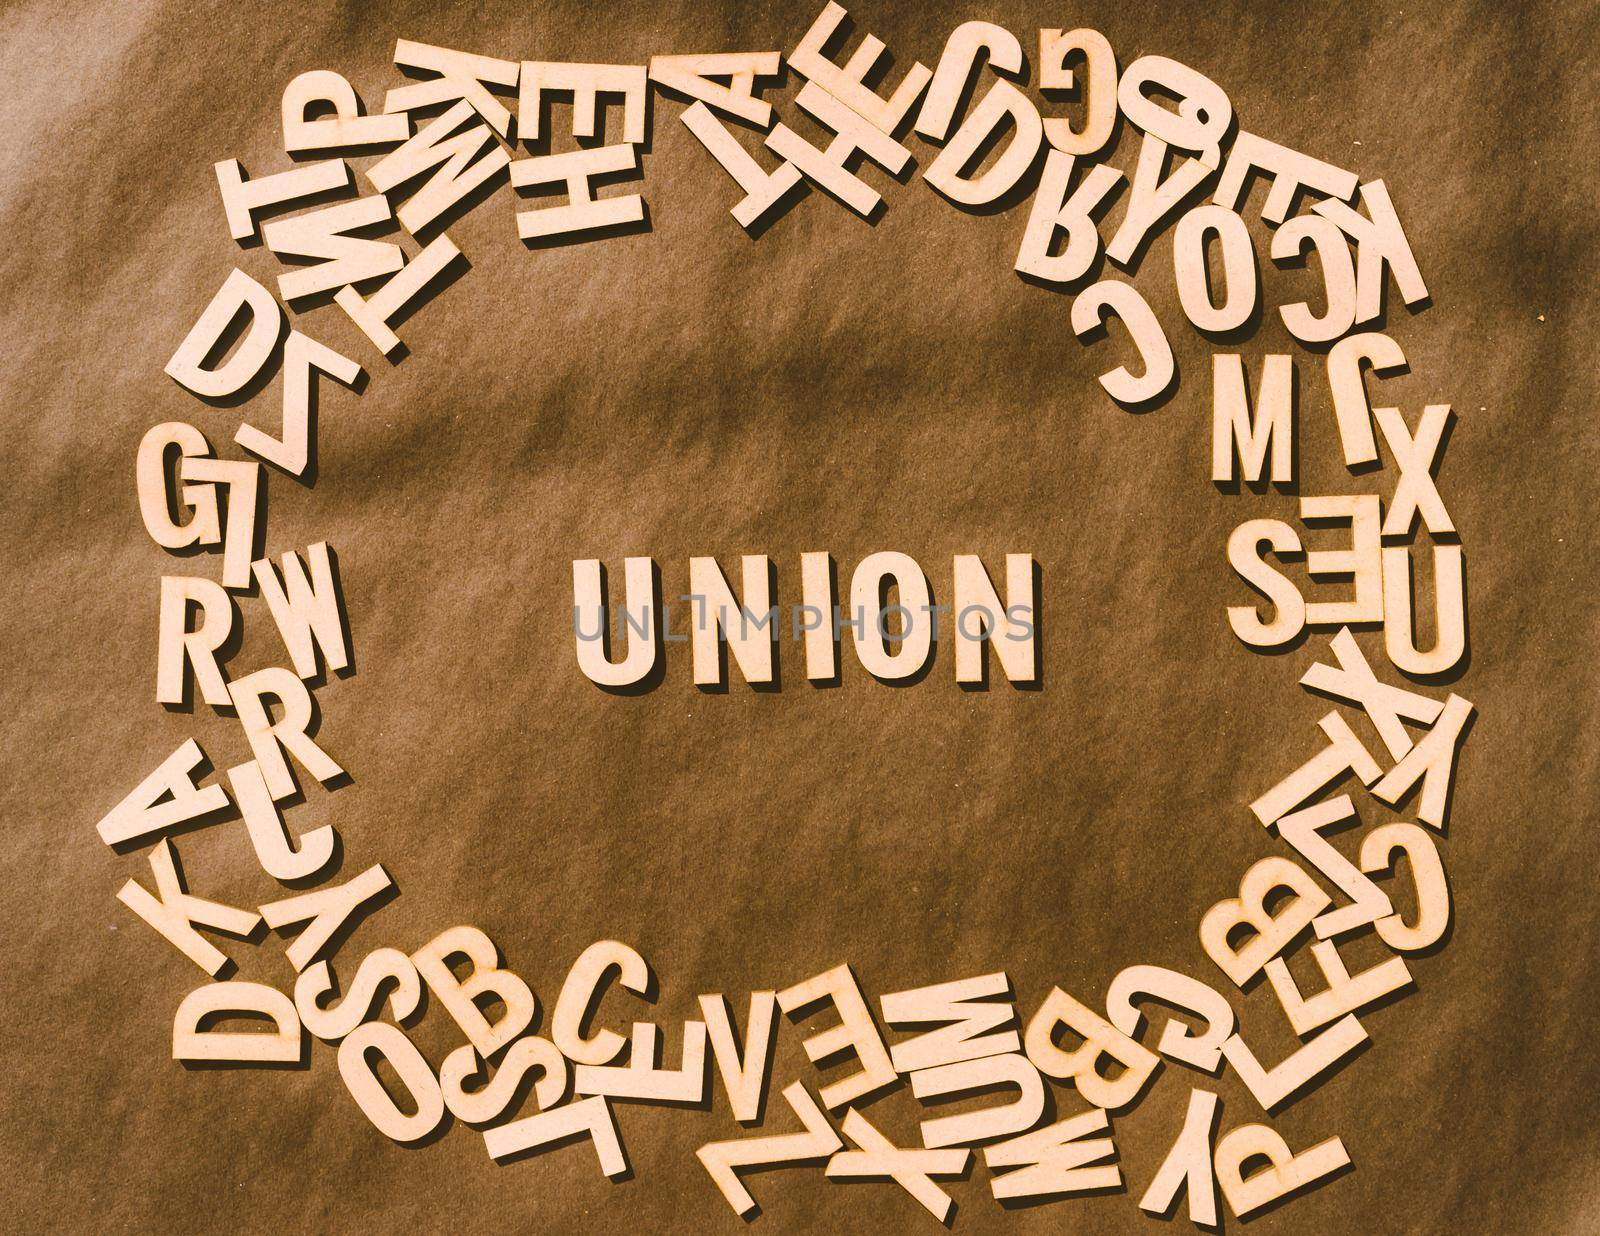 Union Word In Wooden Cube Alphabet Letters Top View On A rustic paper Background. by sudiptabhowmick